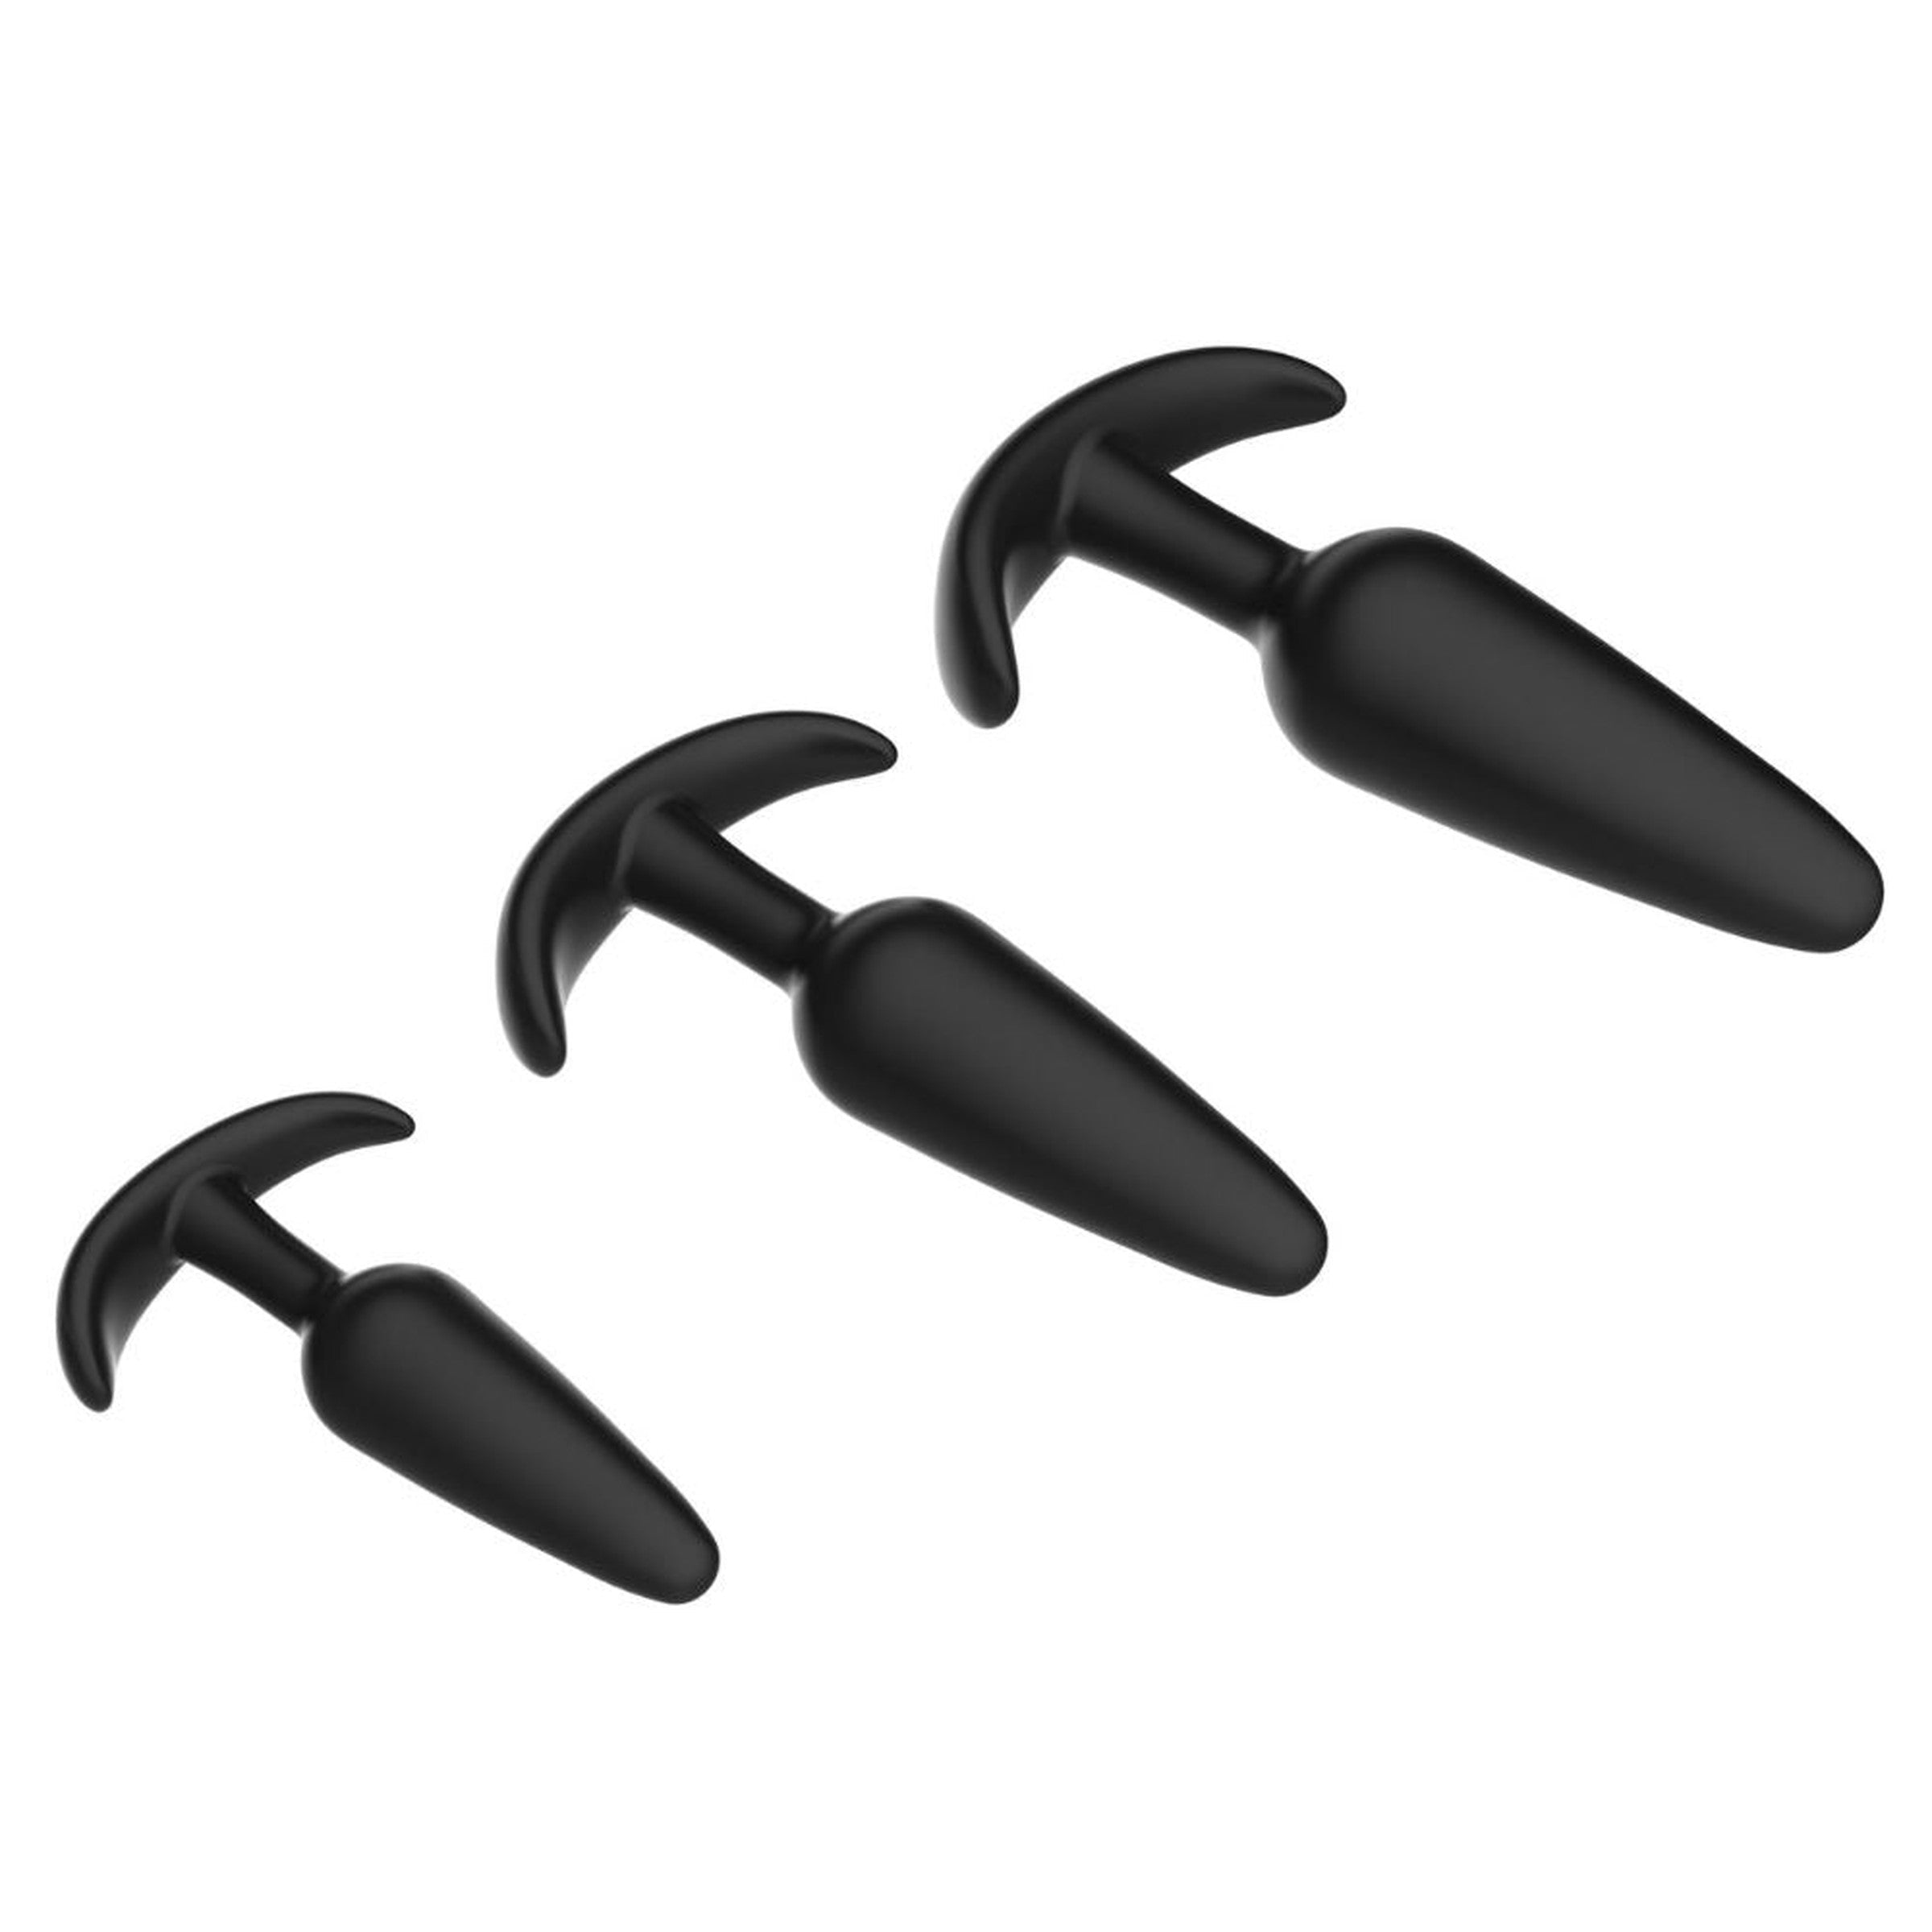 Level Up Anal Trainers 3 Piece Silicone Anchor Set Curious Down